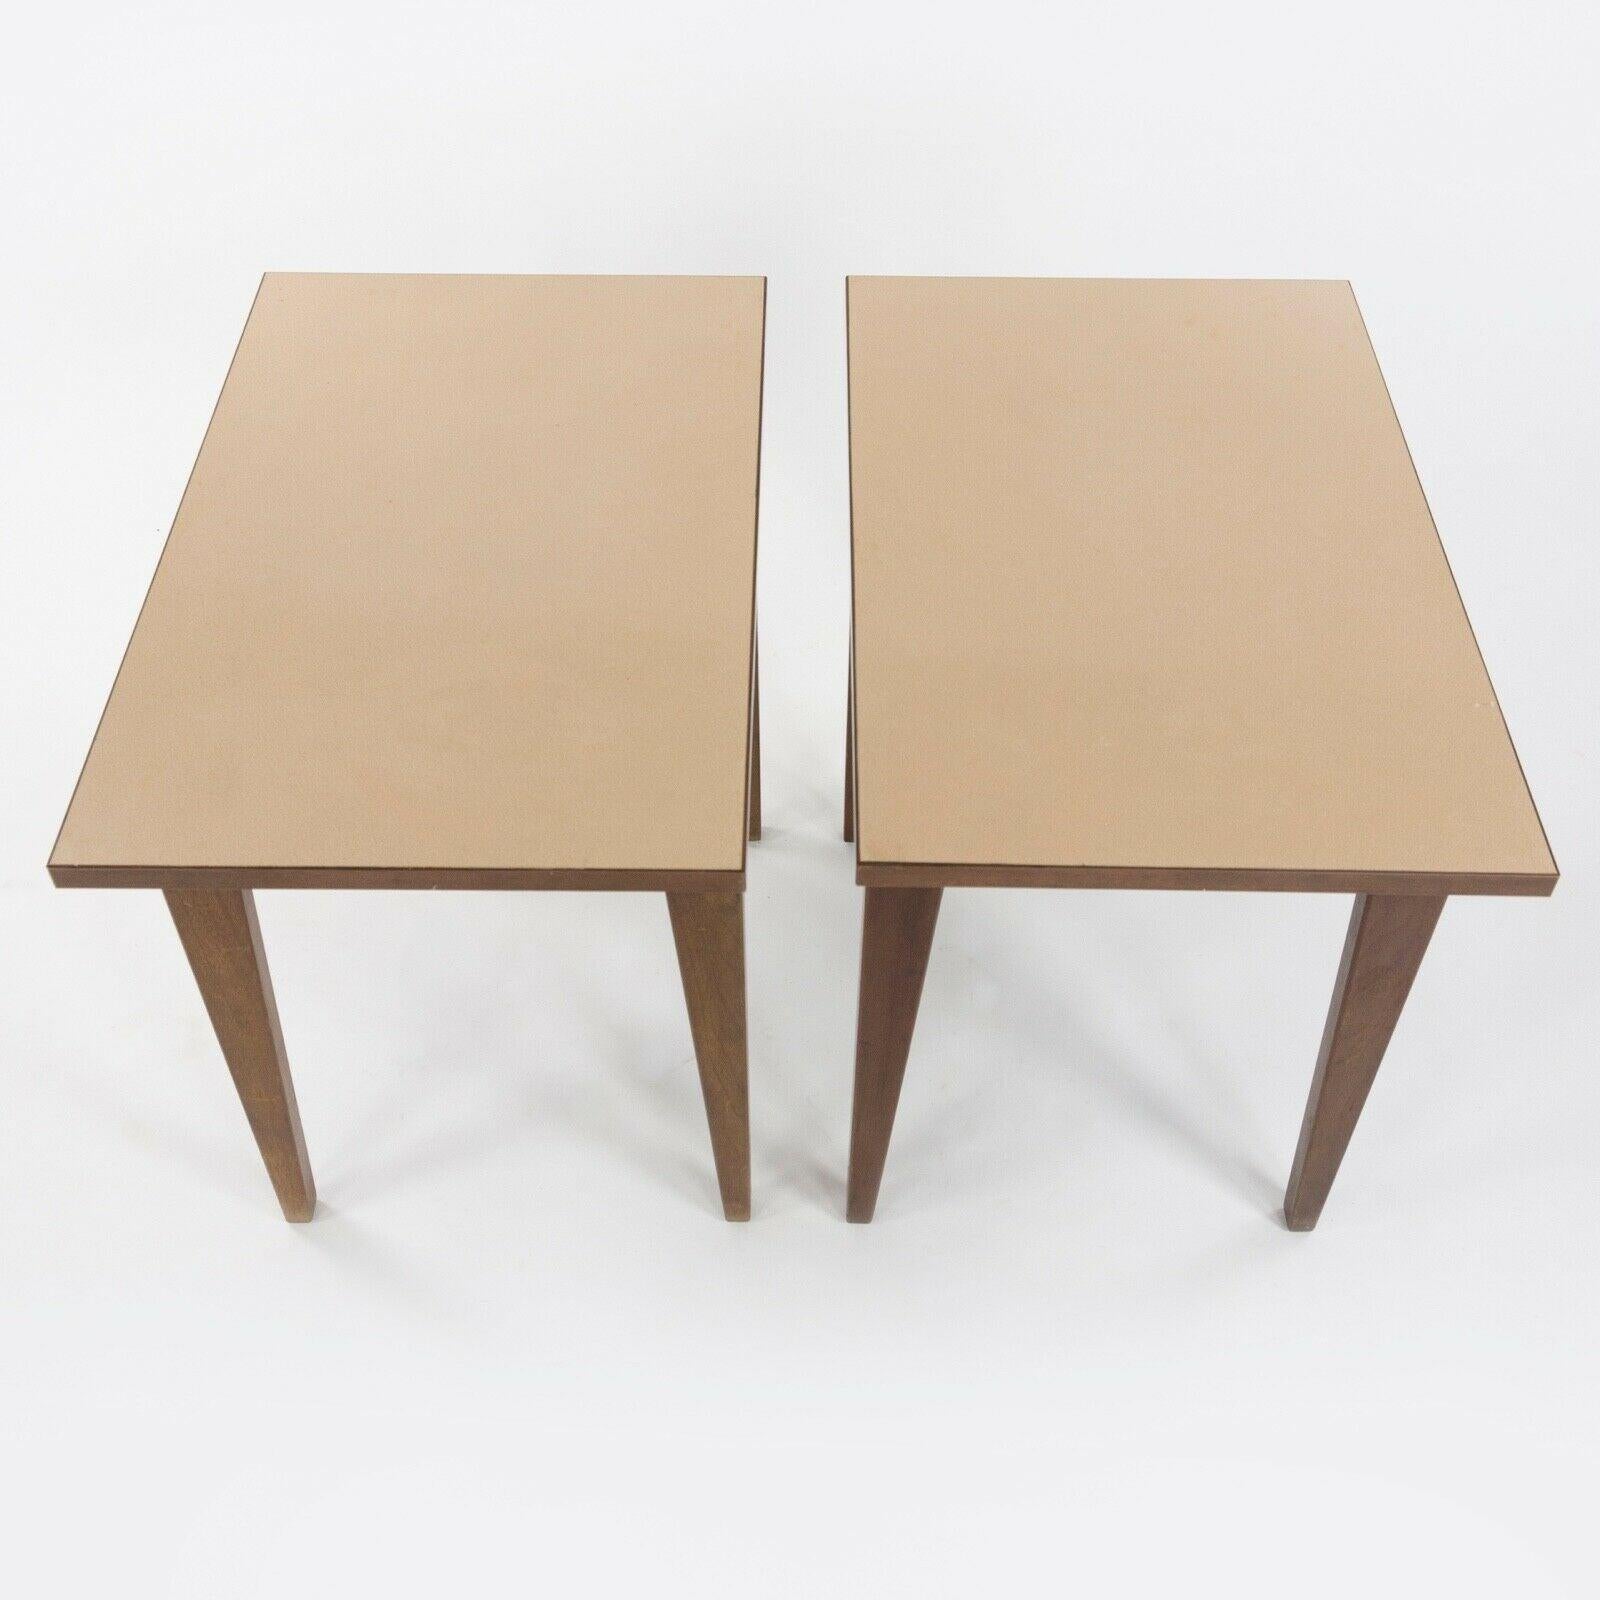 Mid-20th Century 1950s Pair of Jens Risom Designs Inc Walnut & Laminate End / Side Table For Sale